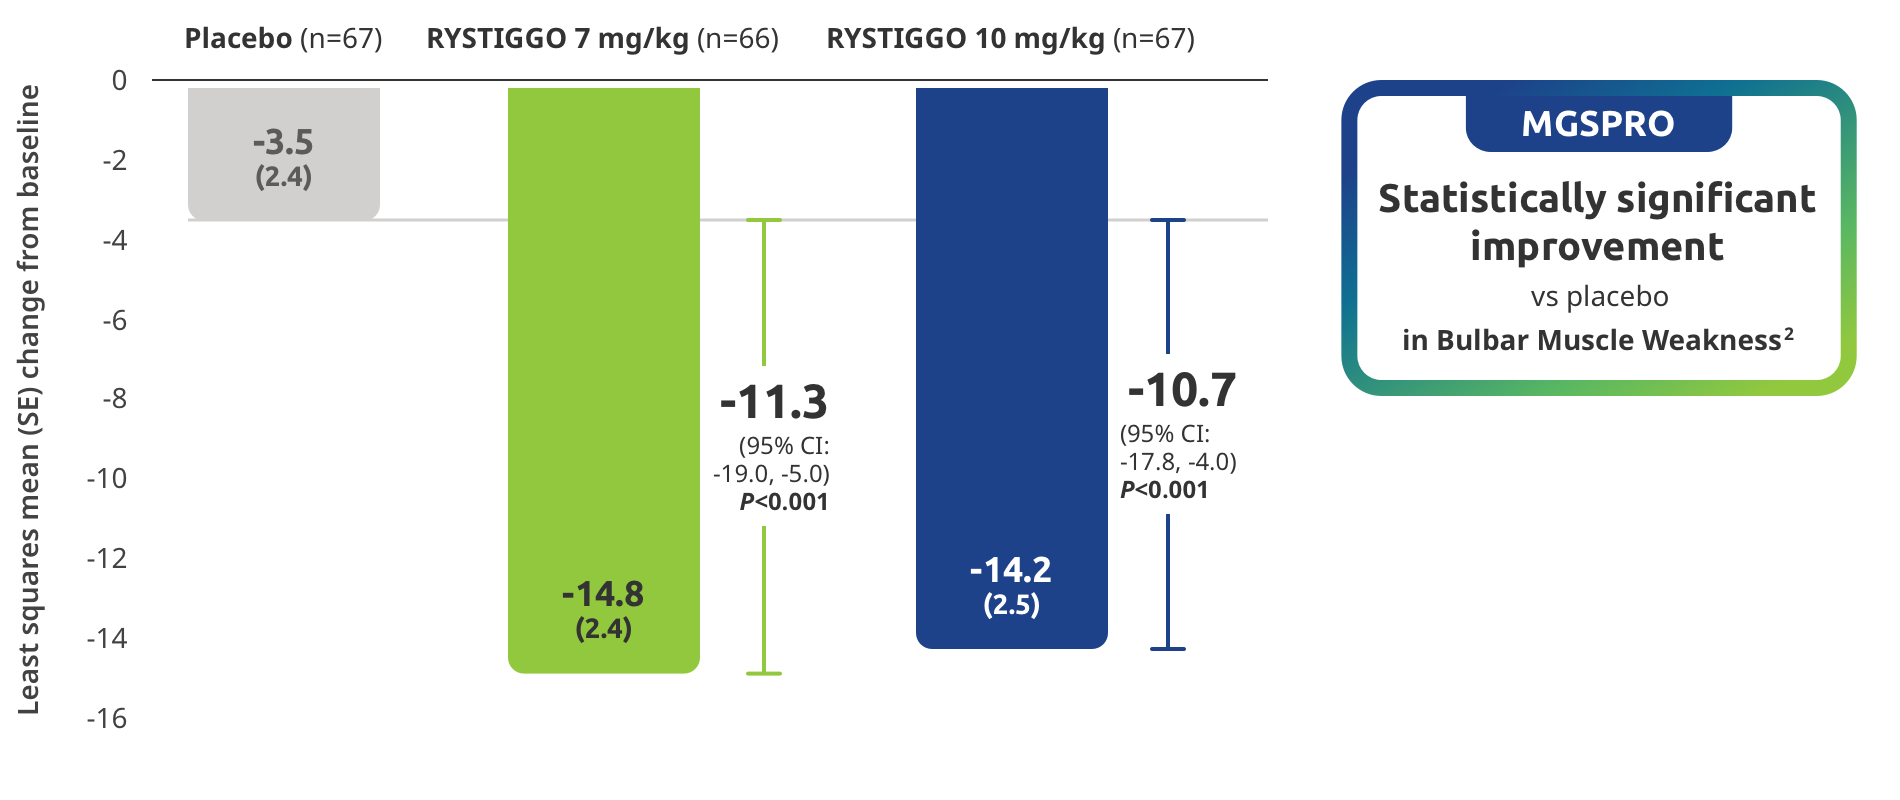 MGSPRO Statistically significant improvement vs placebo in Bulbar Muscle Weakness.